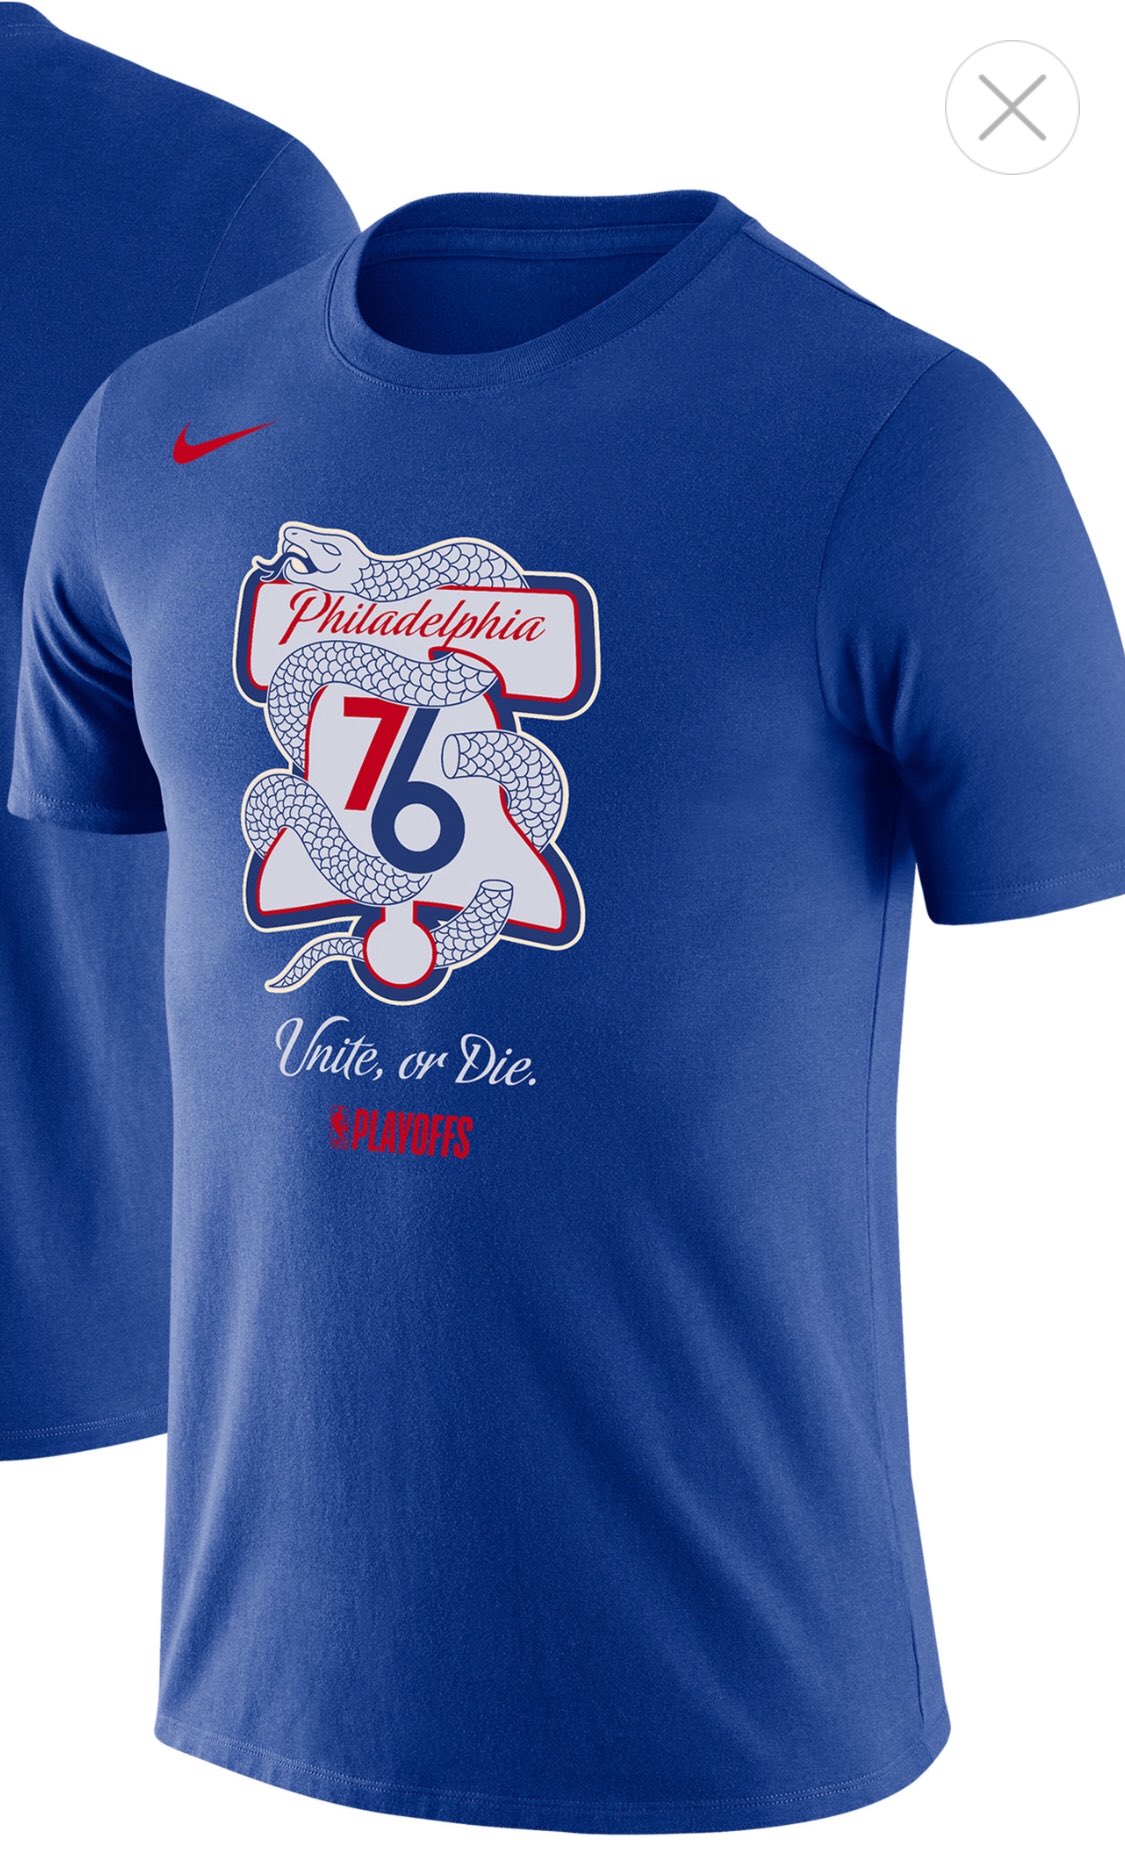 sixers snake t shirt